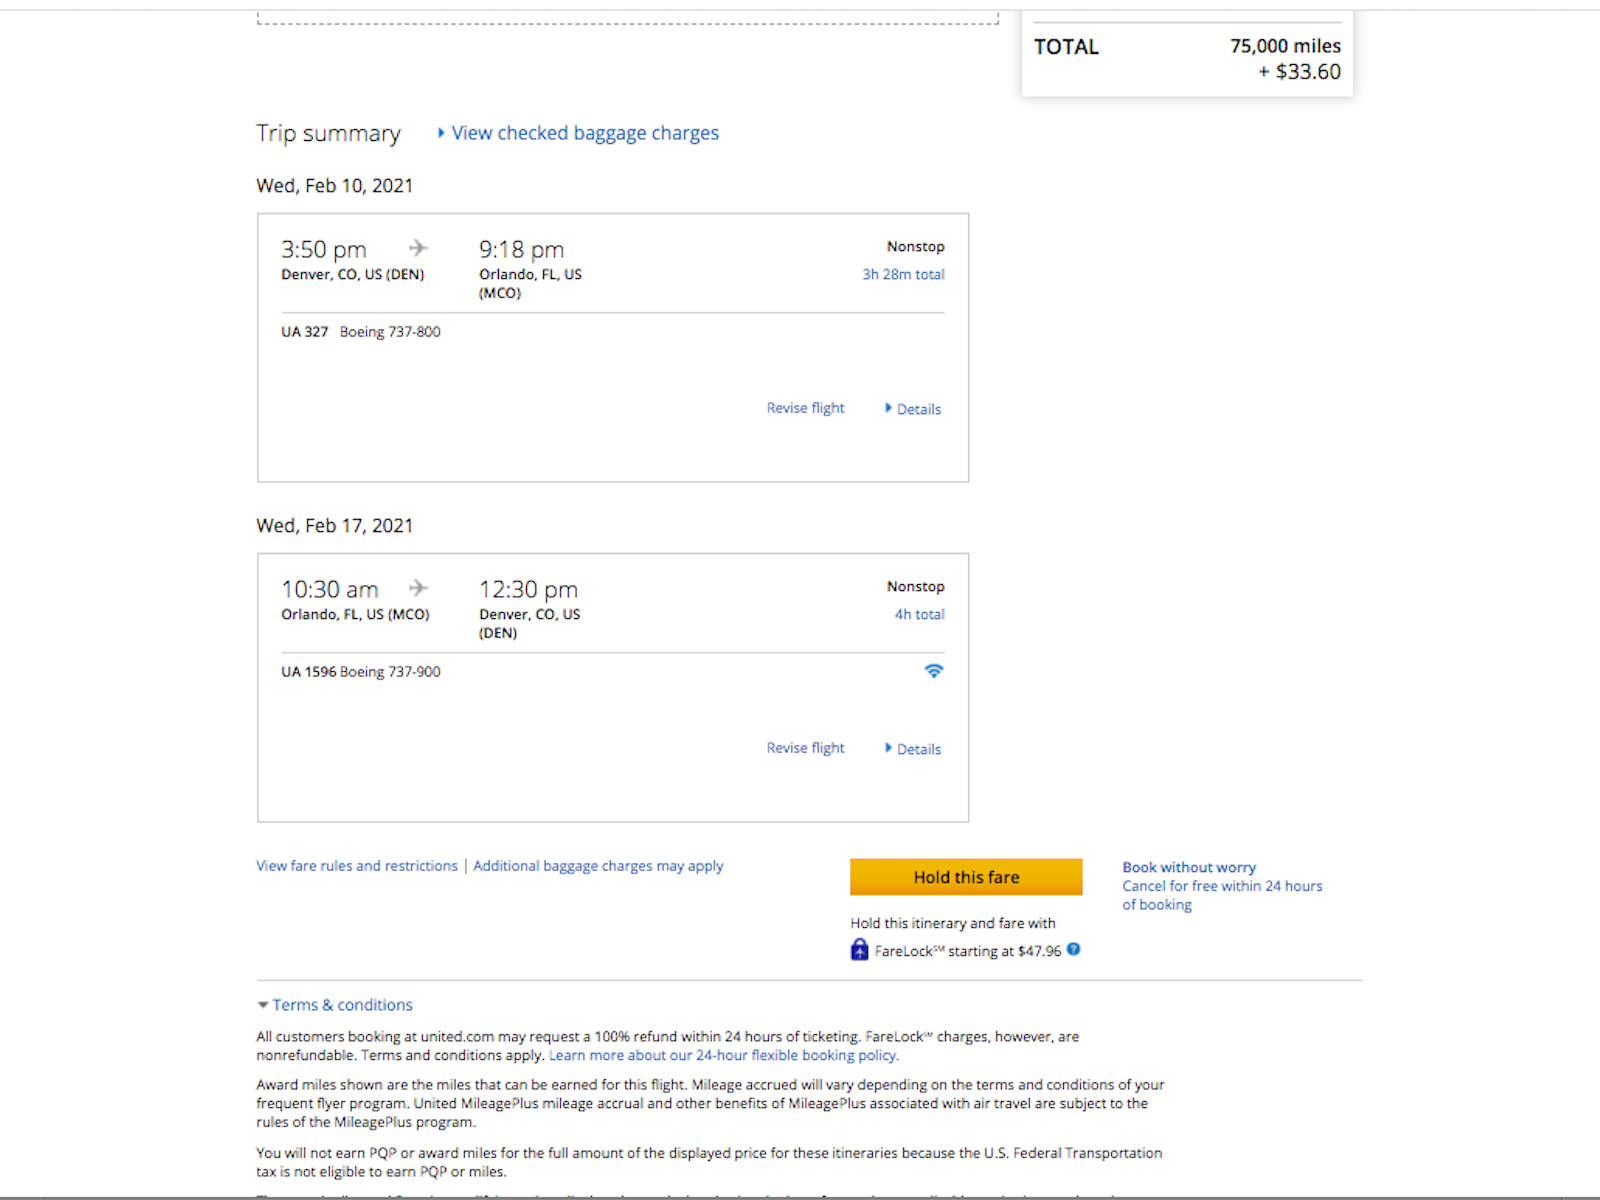 United flights Denver to Orlando for your first trip using points & miles